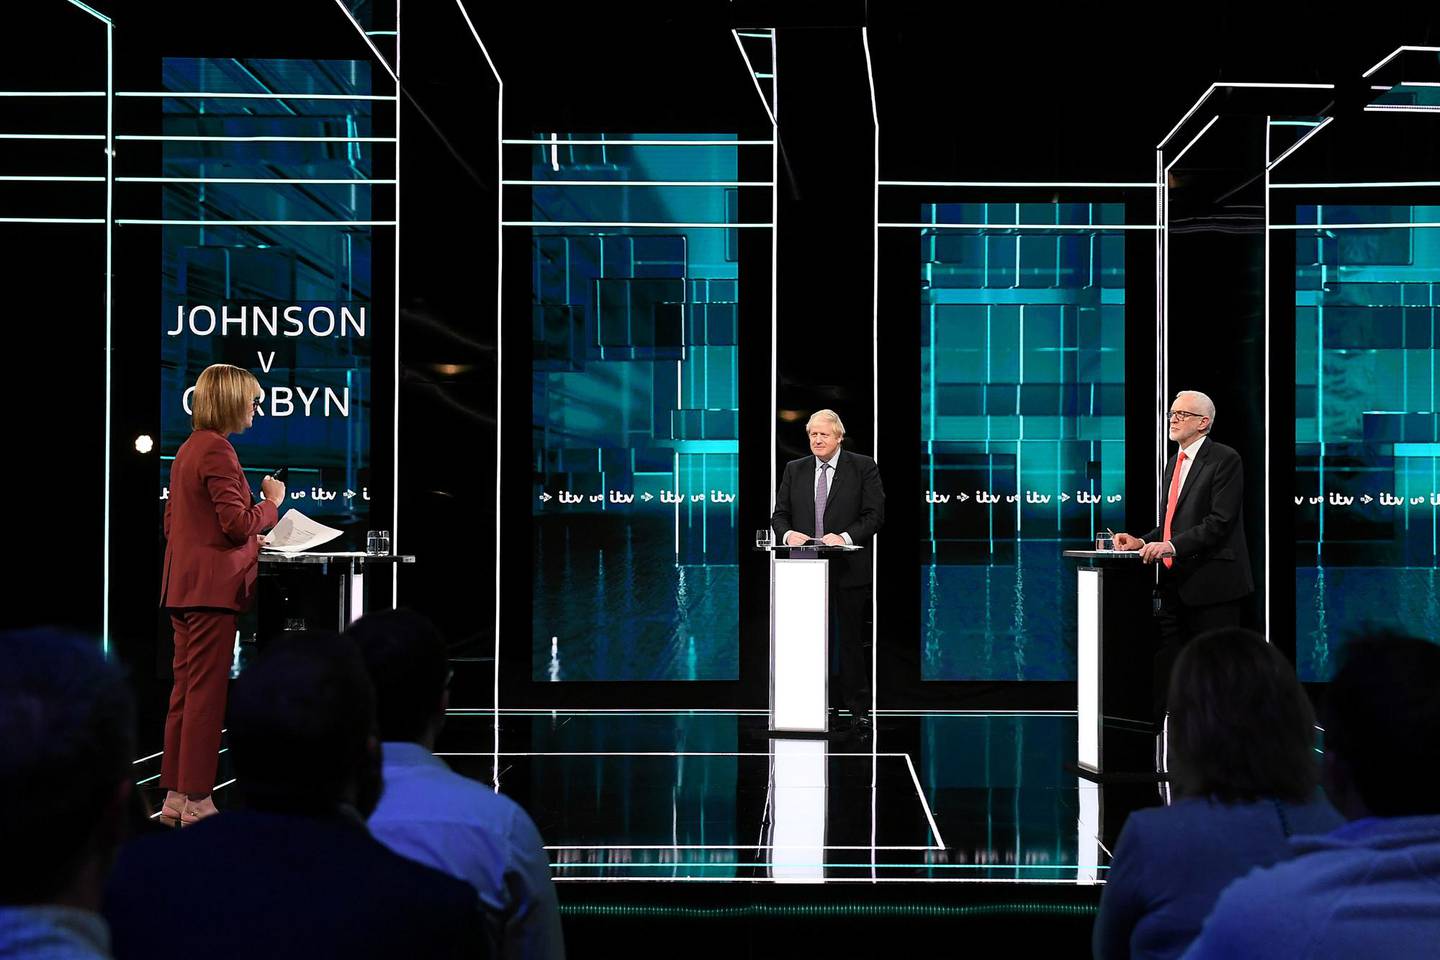 Conservative leader Boris Johnson and Labour leader Jeremy Corbyn are seen during a televised debate ahead of general election in London, Britain, November 19, 2019. Jonathan Hordle/ITV/Handout via REUTERS THIS IMAGE HAS BEEN SUPPLIED BY A THIRD PARTY. NO RESALES. NO ARCHIVES. PICTURE AVAILABLE FOR USE ONLY UNTIL DECEMBER 19TH 2019.